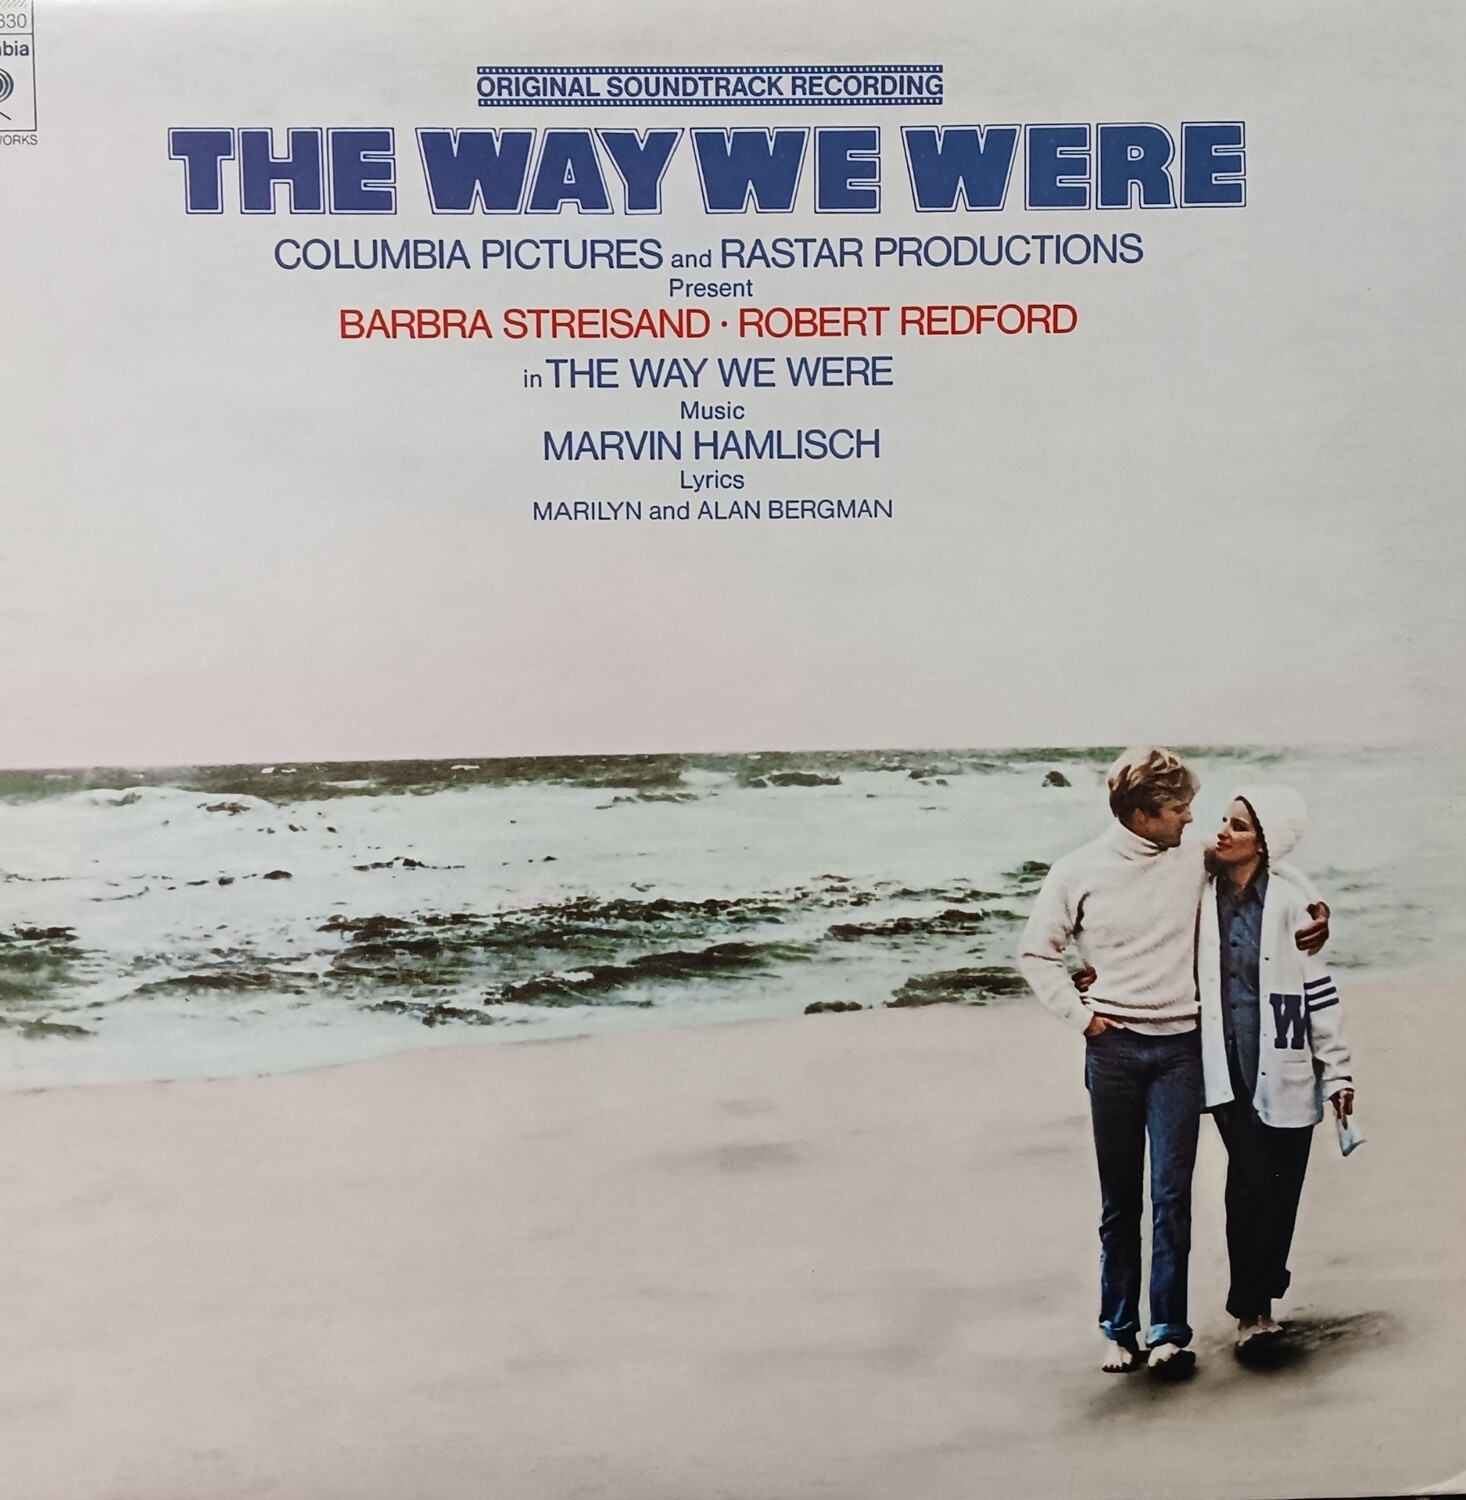 The way we were soundtrack